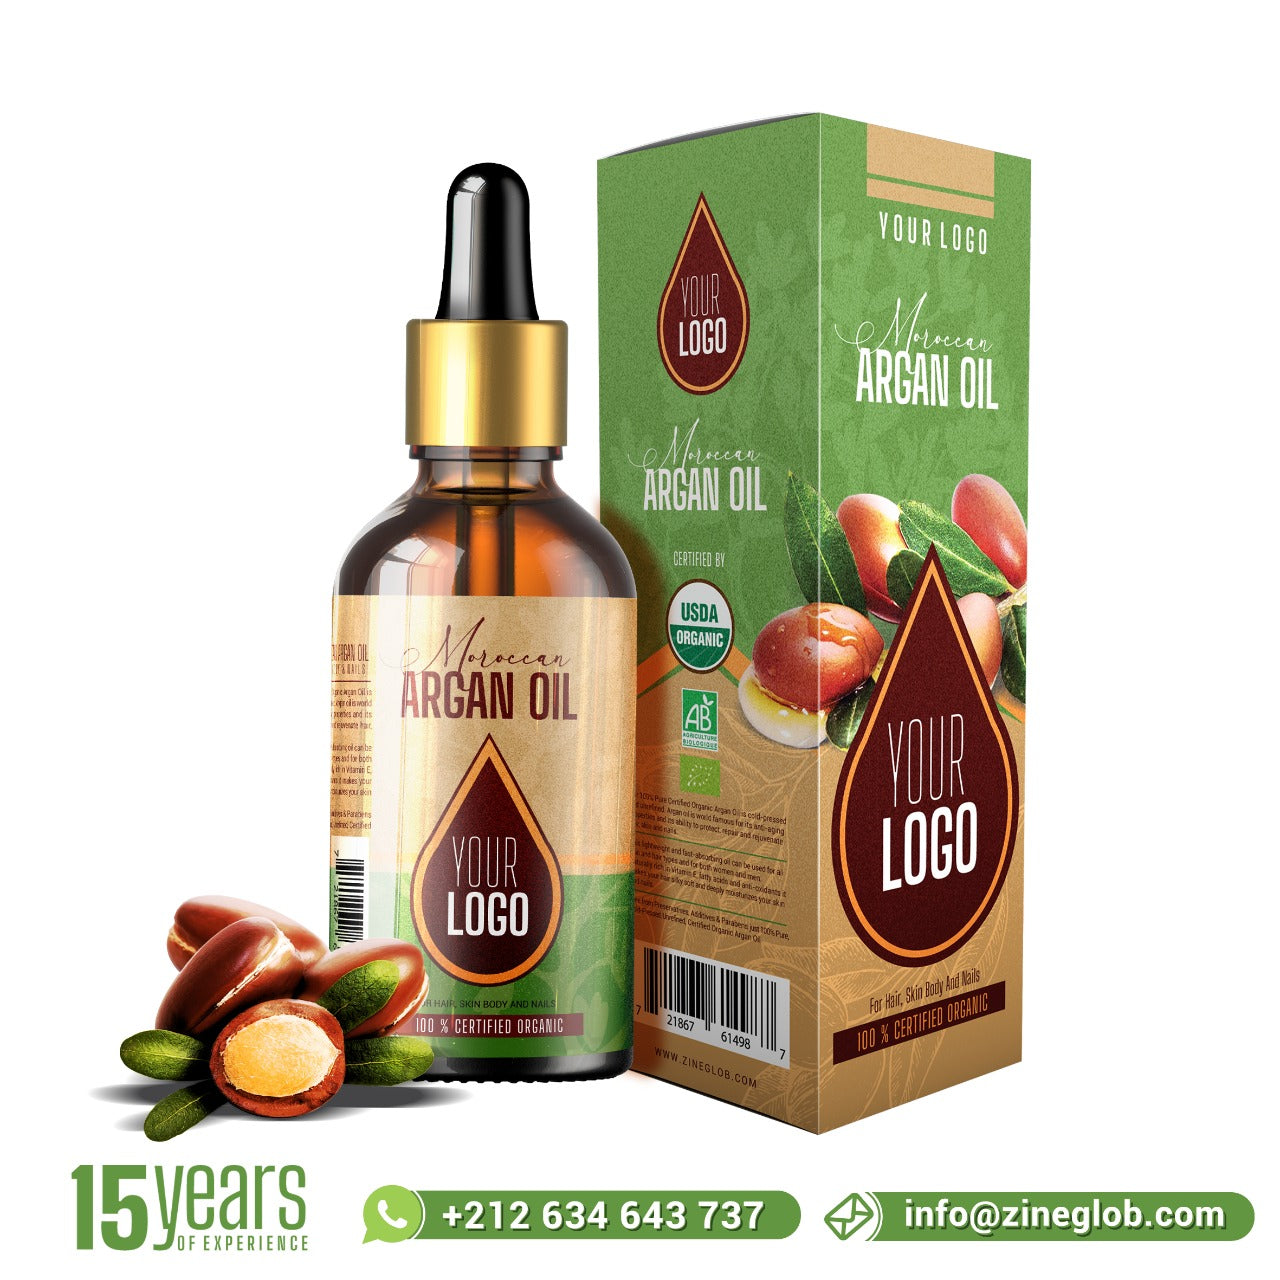 FOUR STEPS TO CREATING YOUR OWN BRAND ARGAN OIL